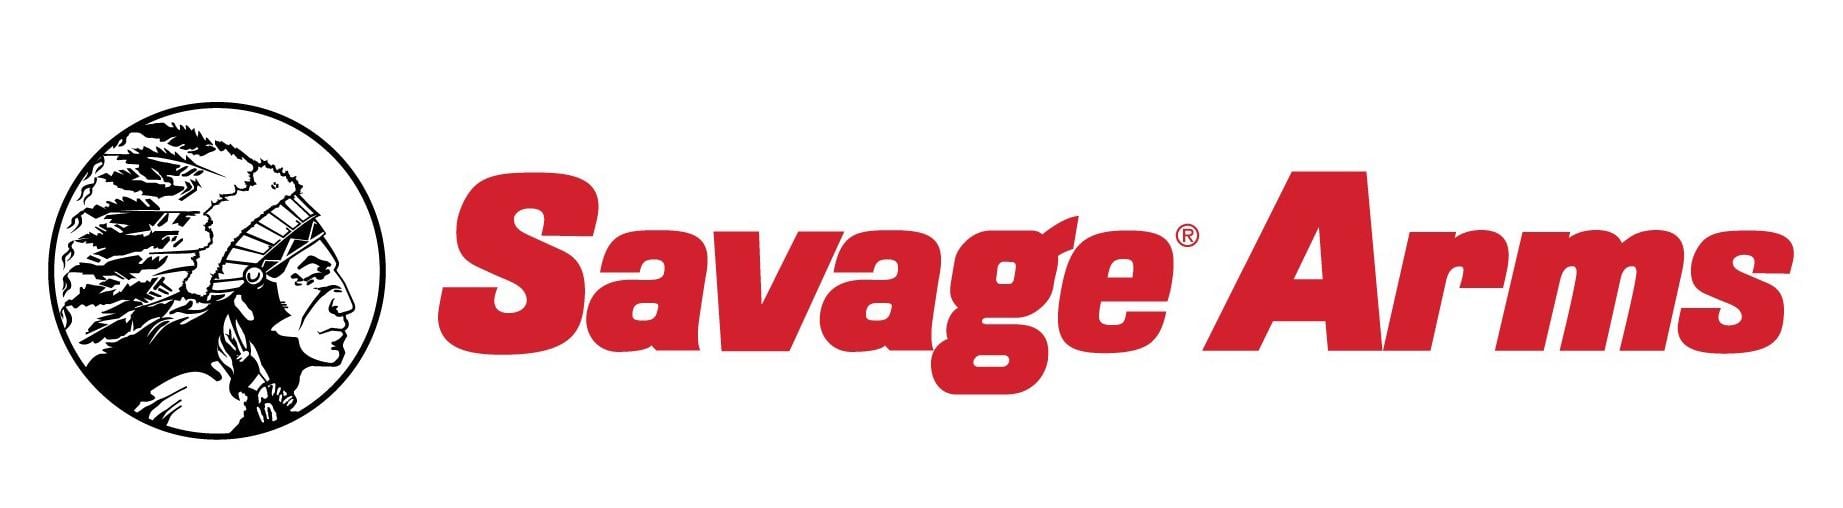 New Savage Arms Logo - Savage Arms Introduces the New Model 11 Scout Rifle - SHOT Business